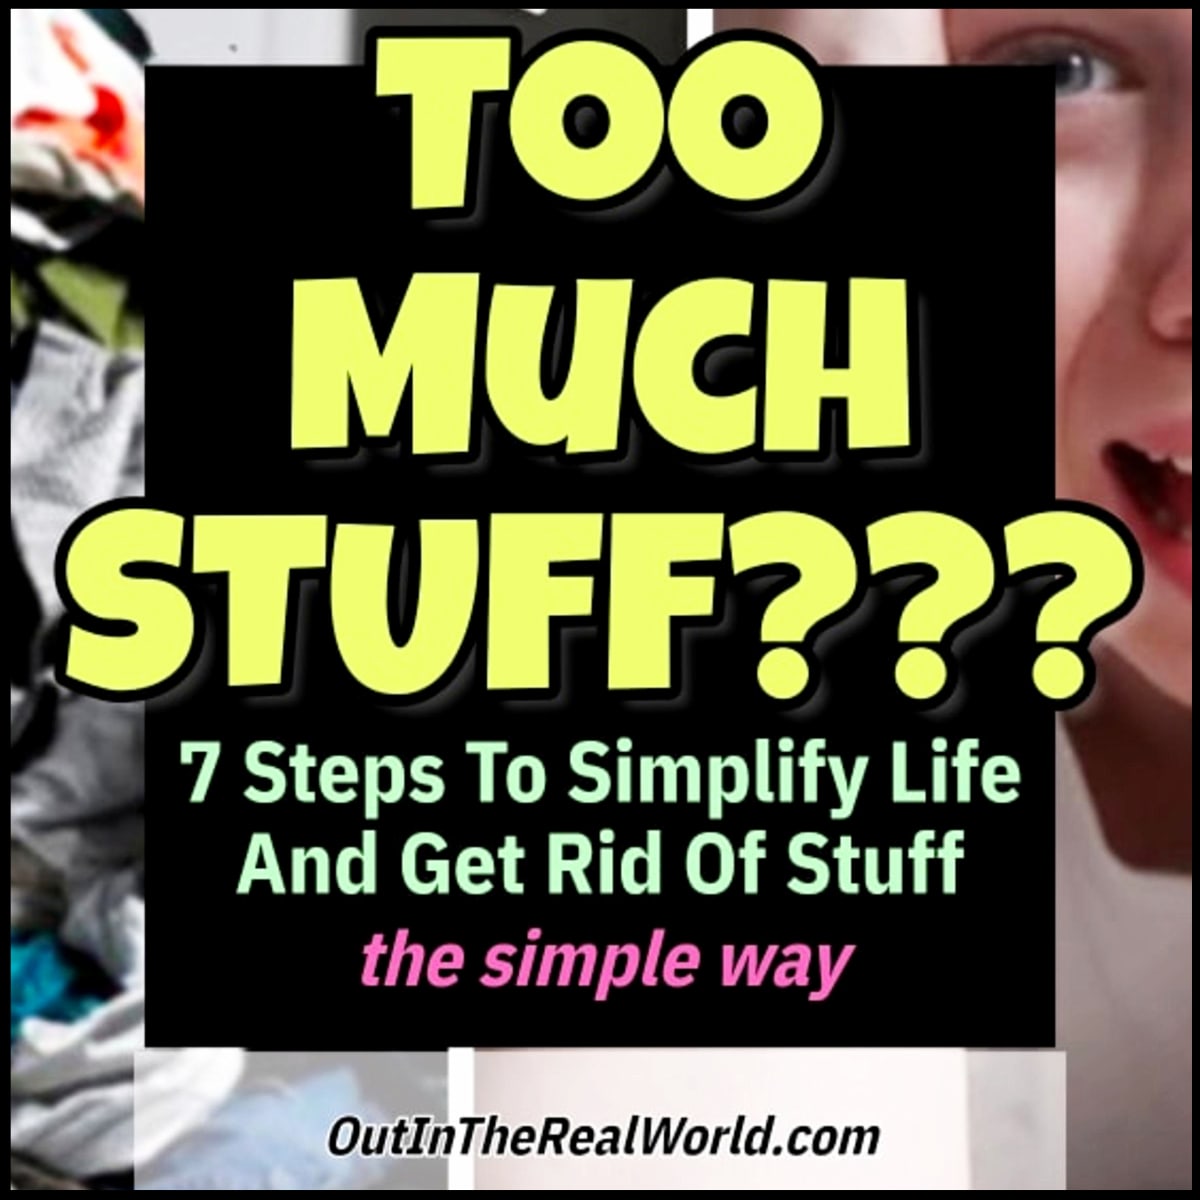 Too Much Stuff Not Enough SPACE - declutter the clutter and STUFF in your house room by room. How to simplify life and get rid of stuff when you have too much